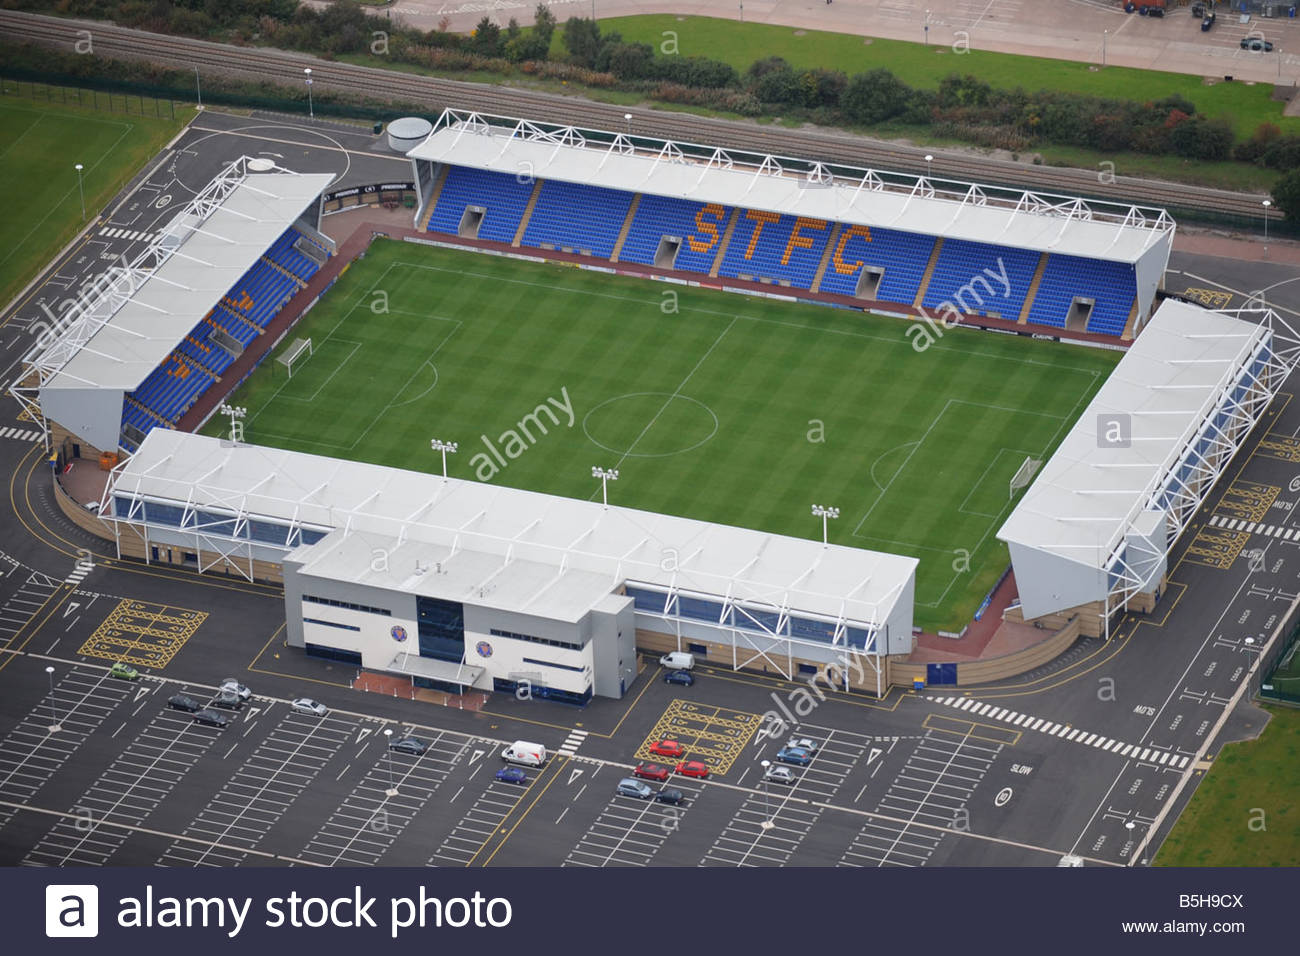 Image result for new meadow shrewsbury